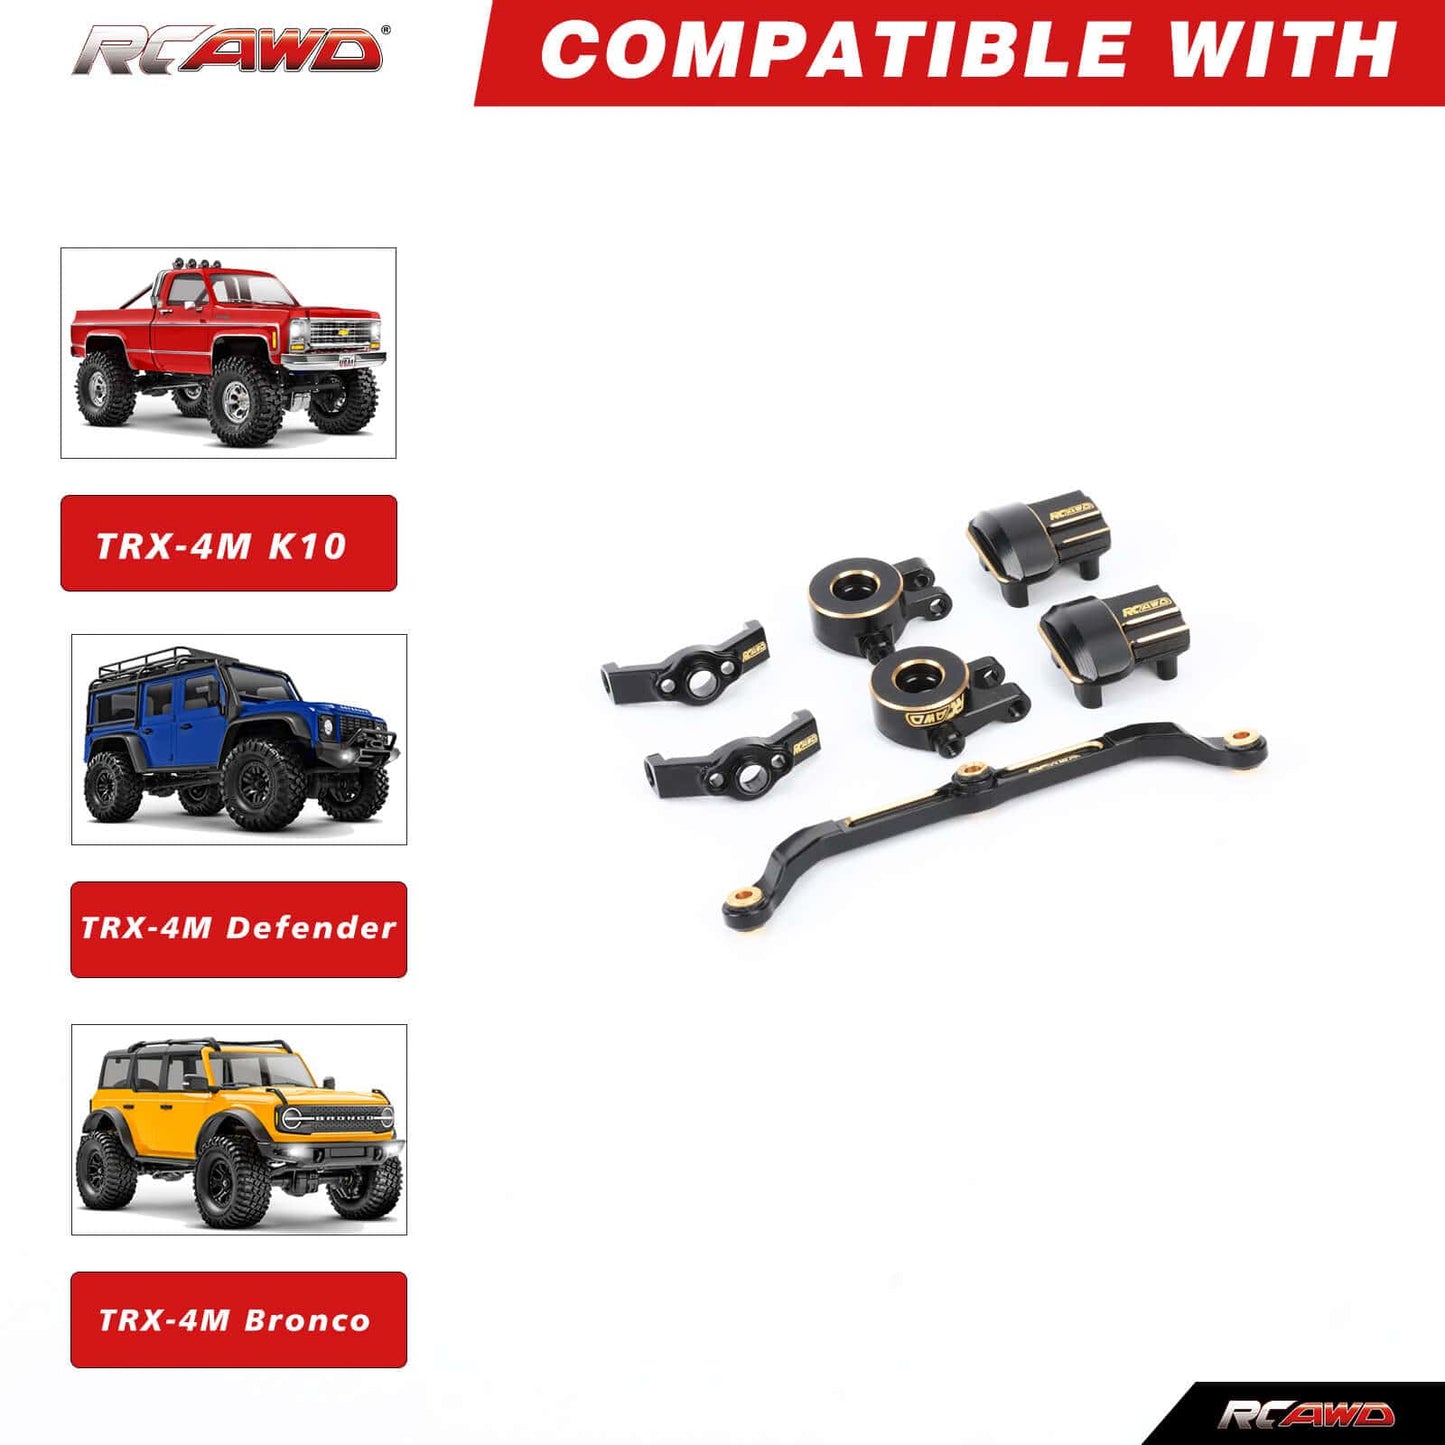 RCAWD Full Brass Upgraded Steering Set with F/R Axle Housing for Trx4m Upgrades - RCAWD